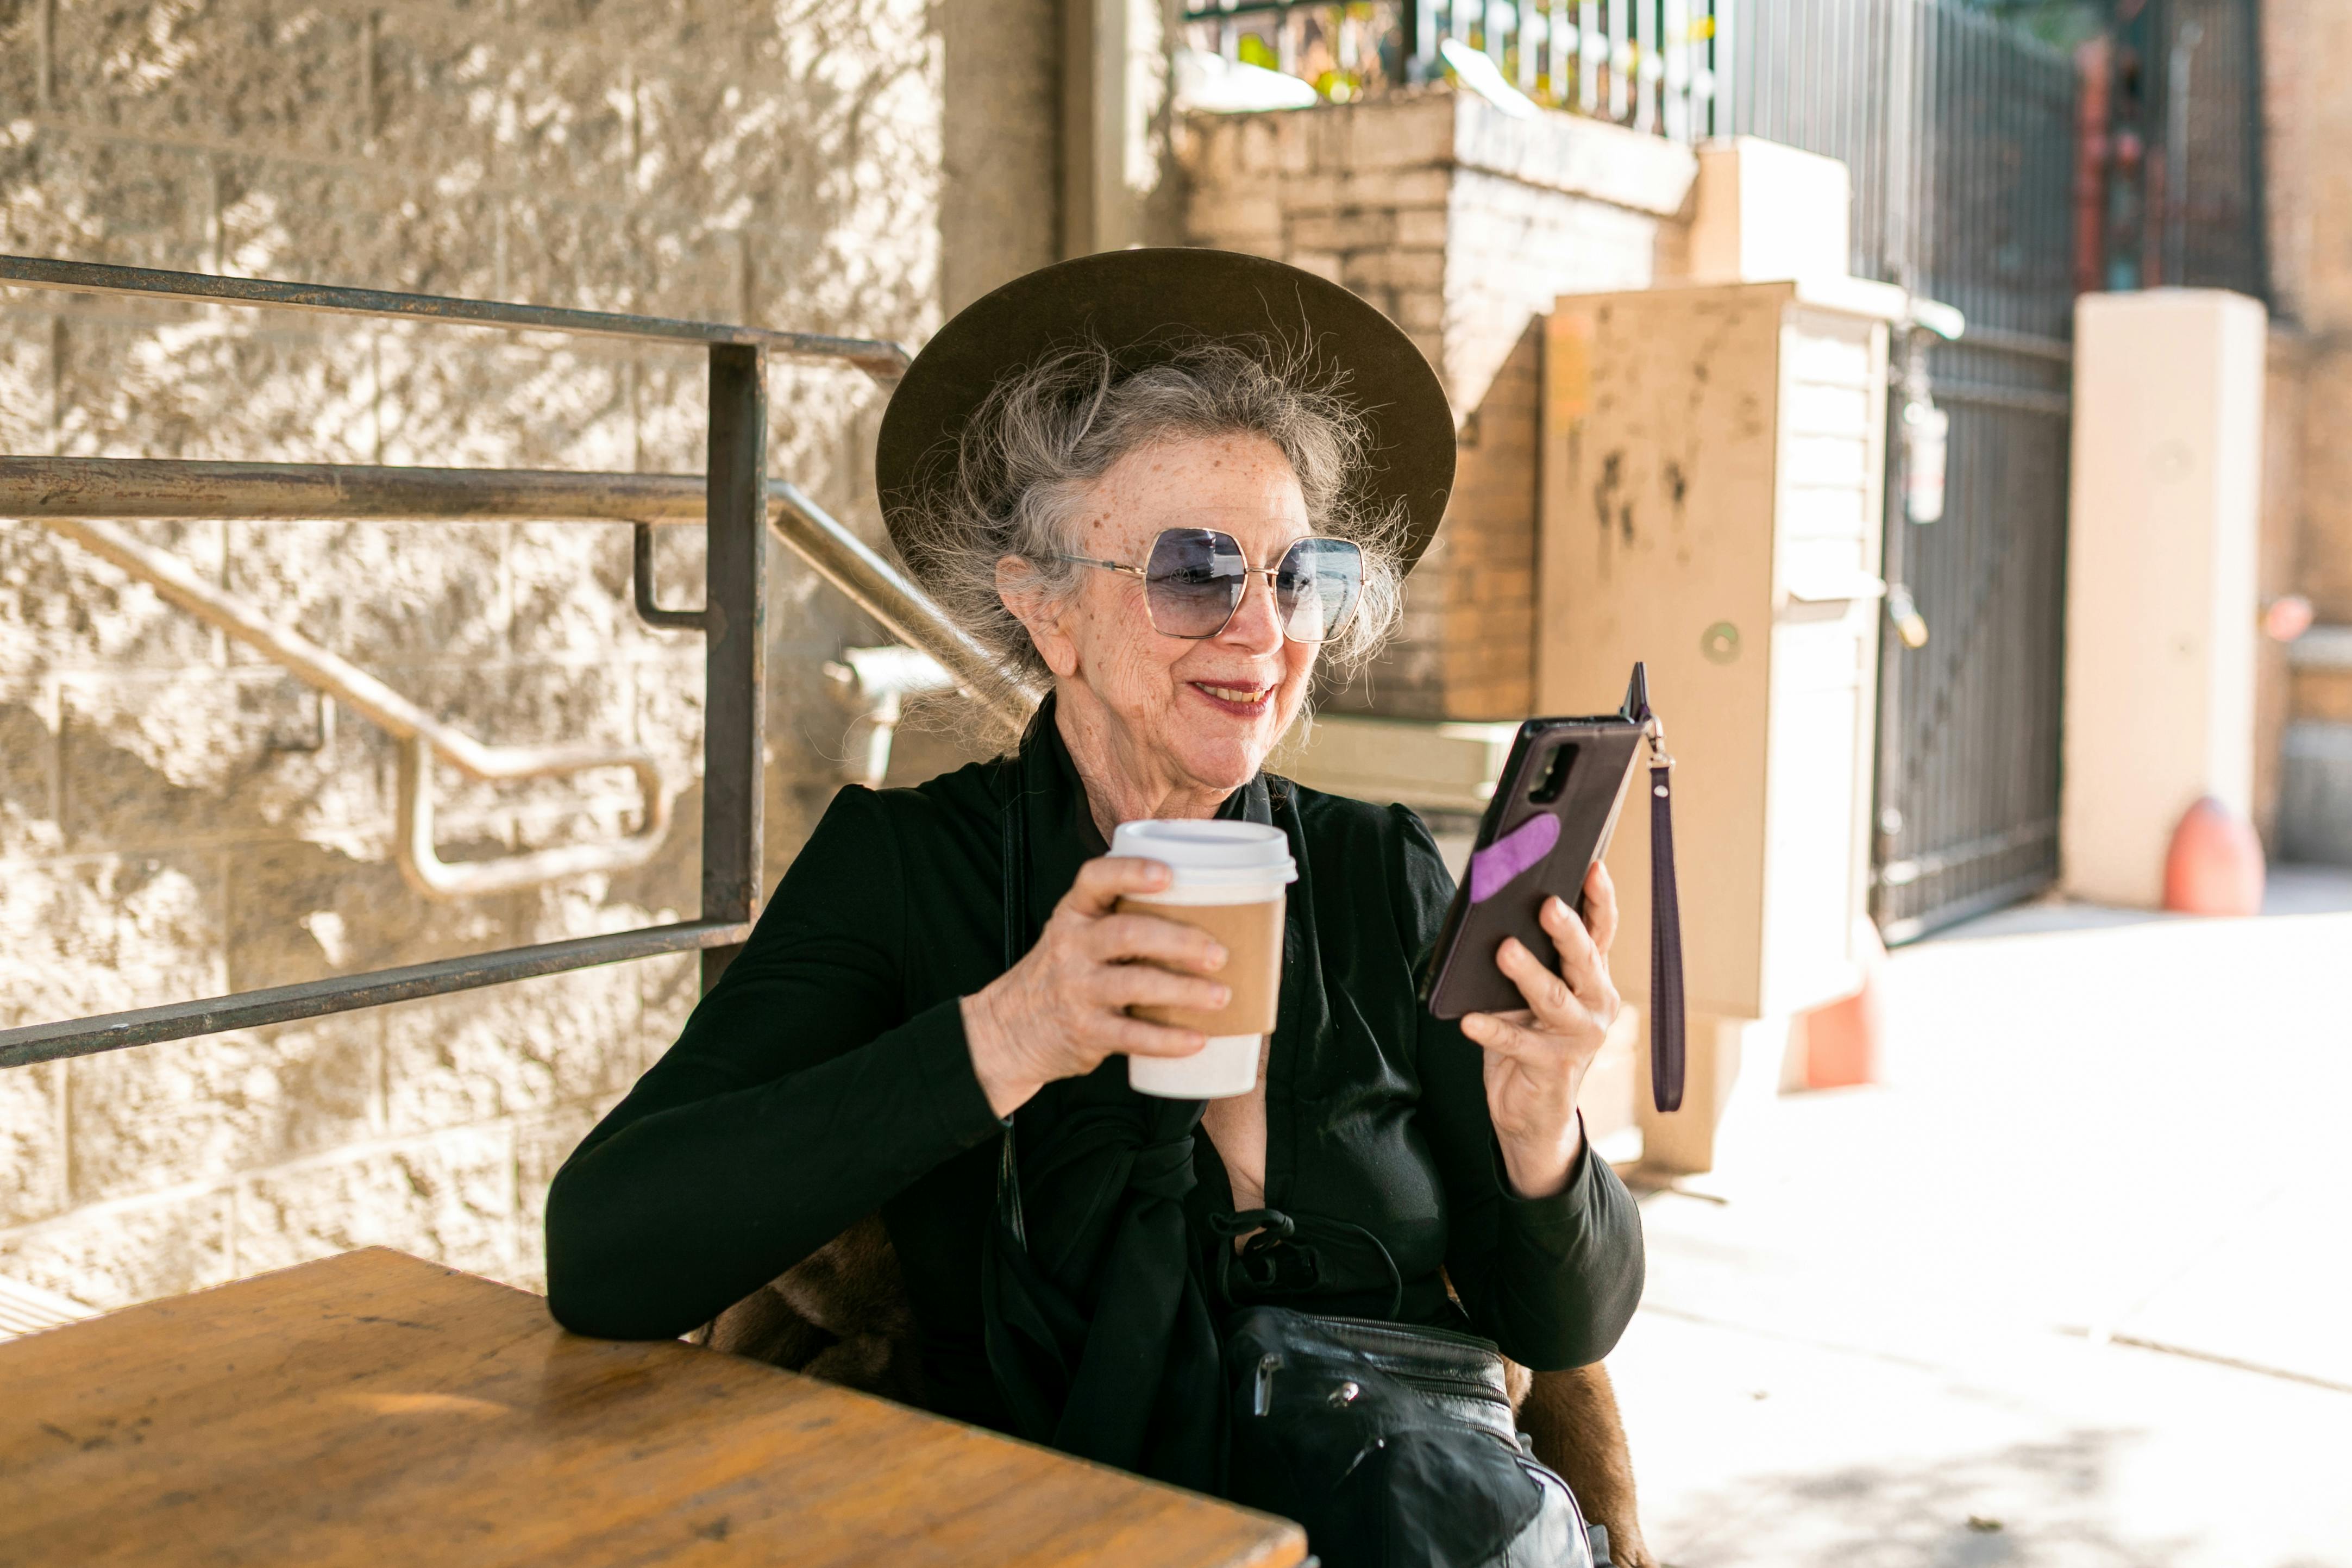 Woman in black using her mobile phone while having coffee. | Photo: Pexels